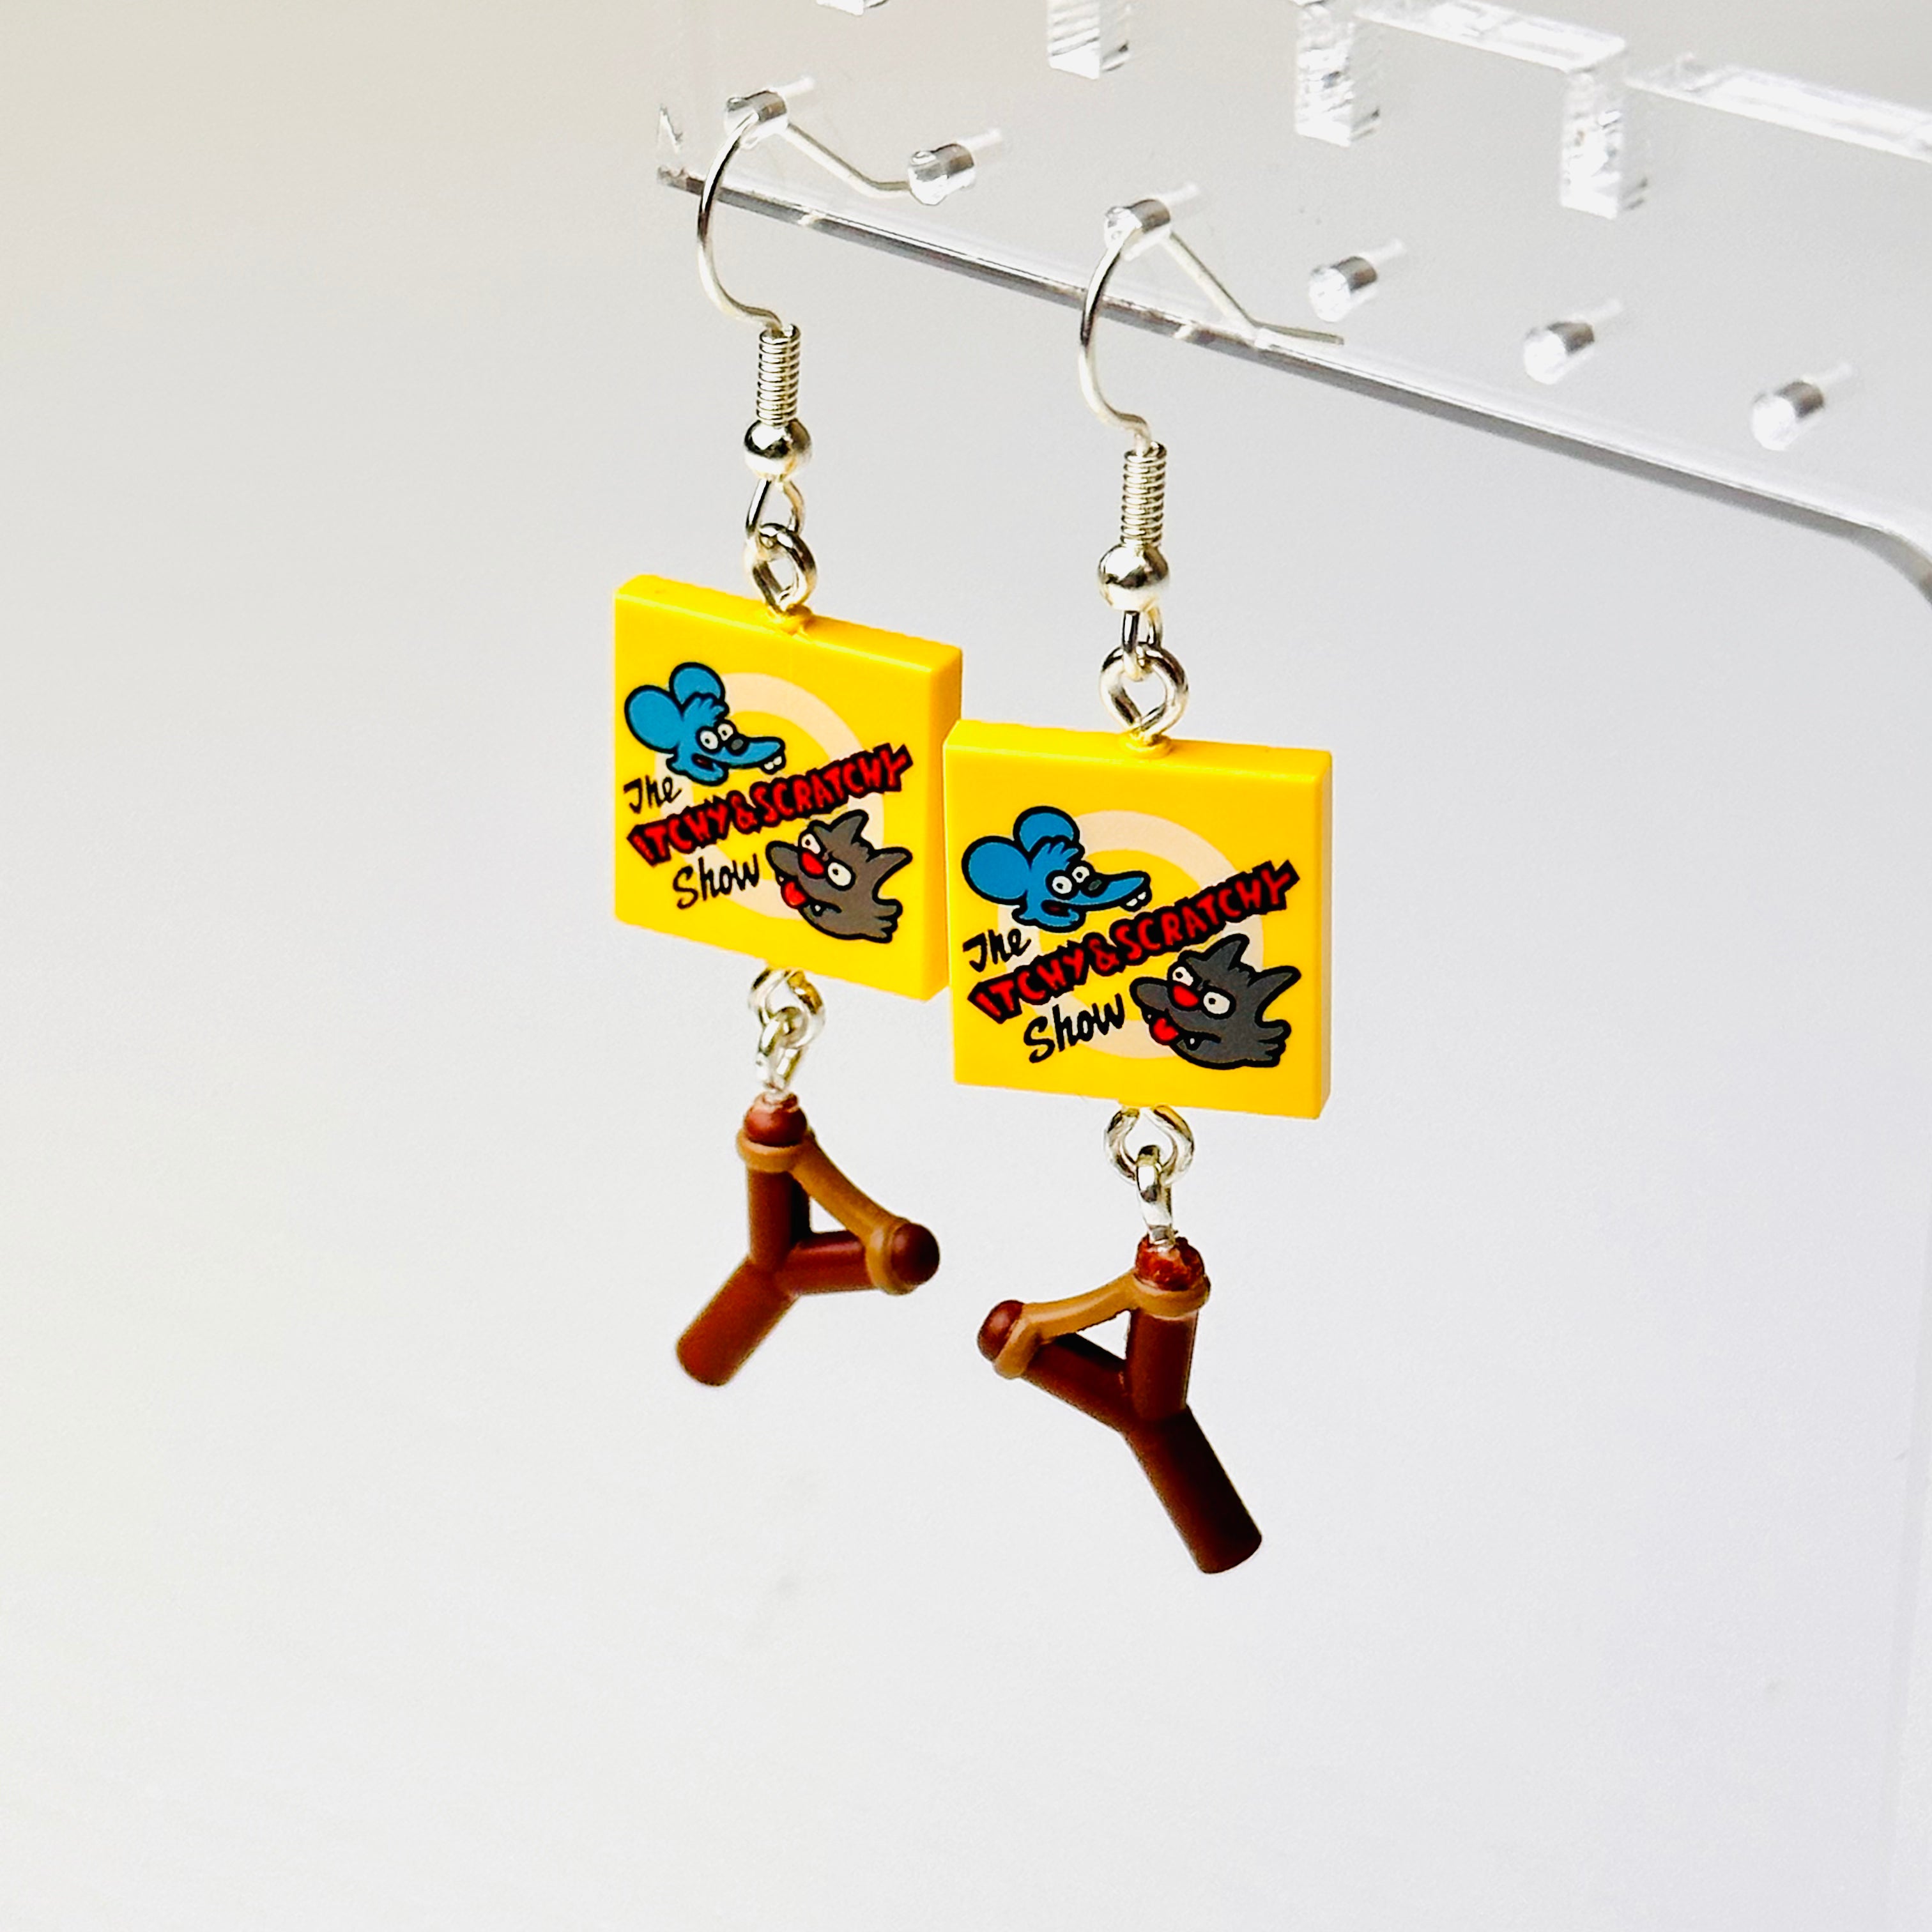 StudBee - Bart Simpson Inspired Earrings, Itchy & Scratchy Cartoon Slingshot 90's Retro Jewelry, Handmade with Lego®